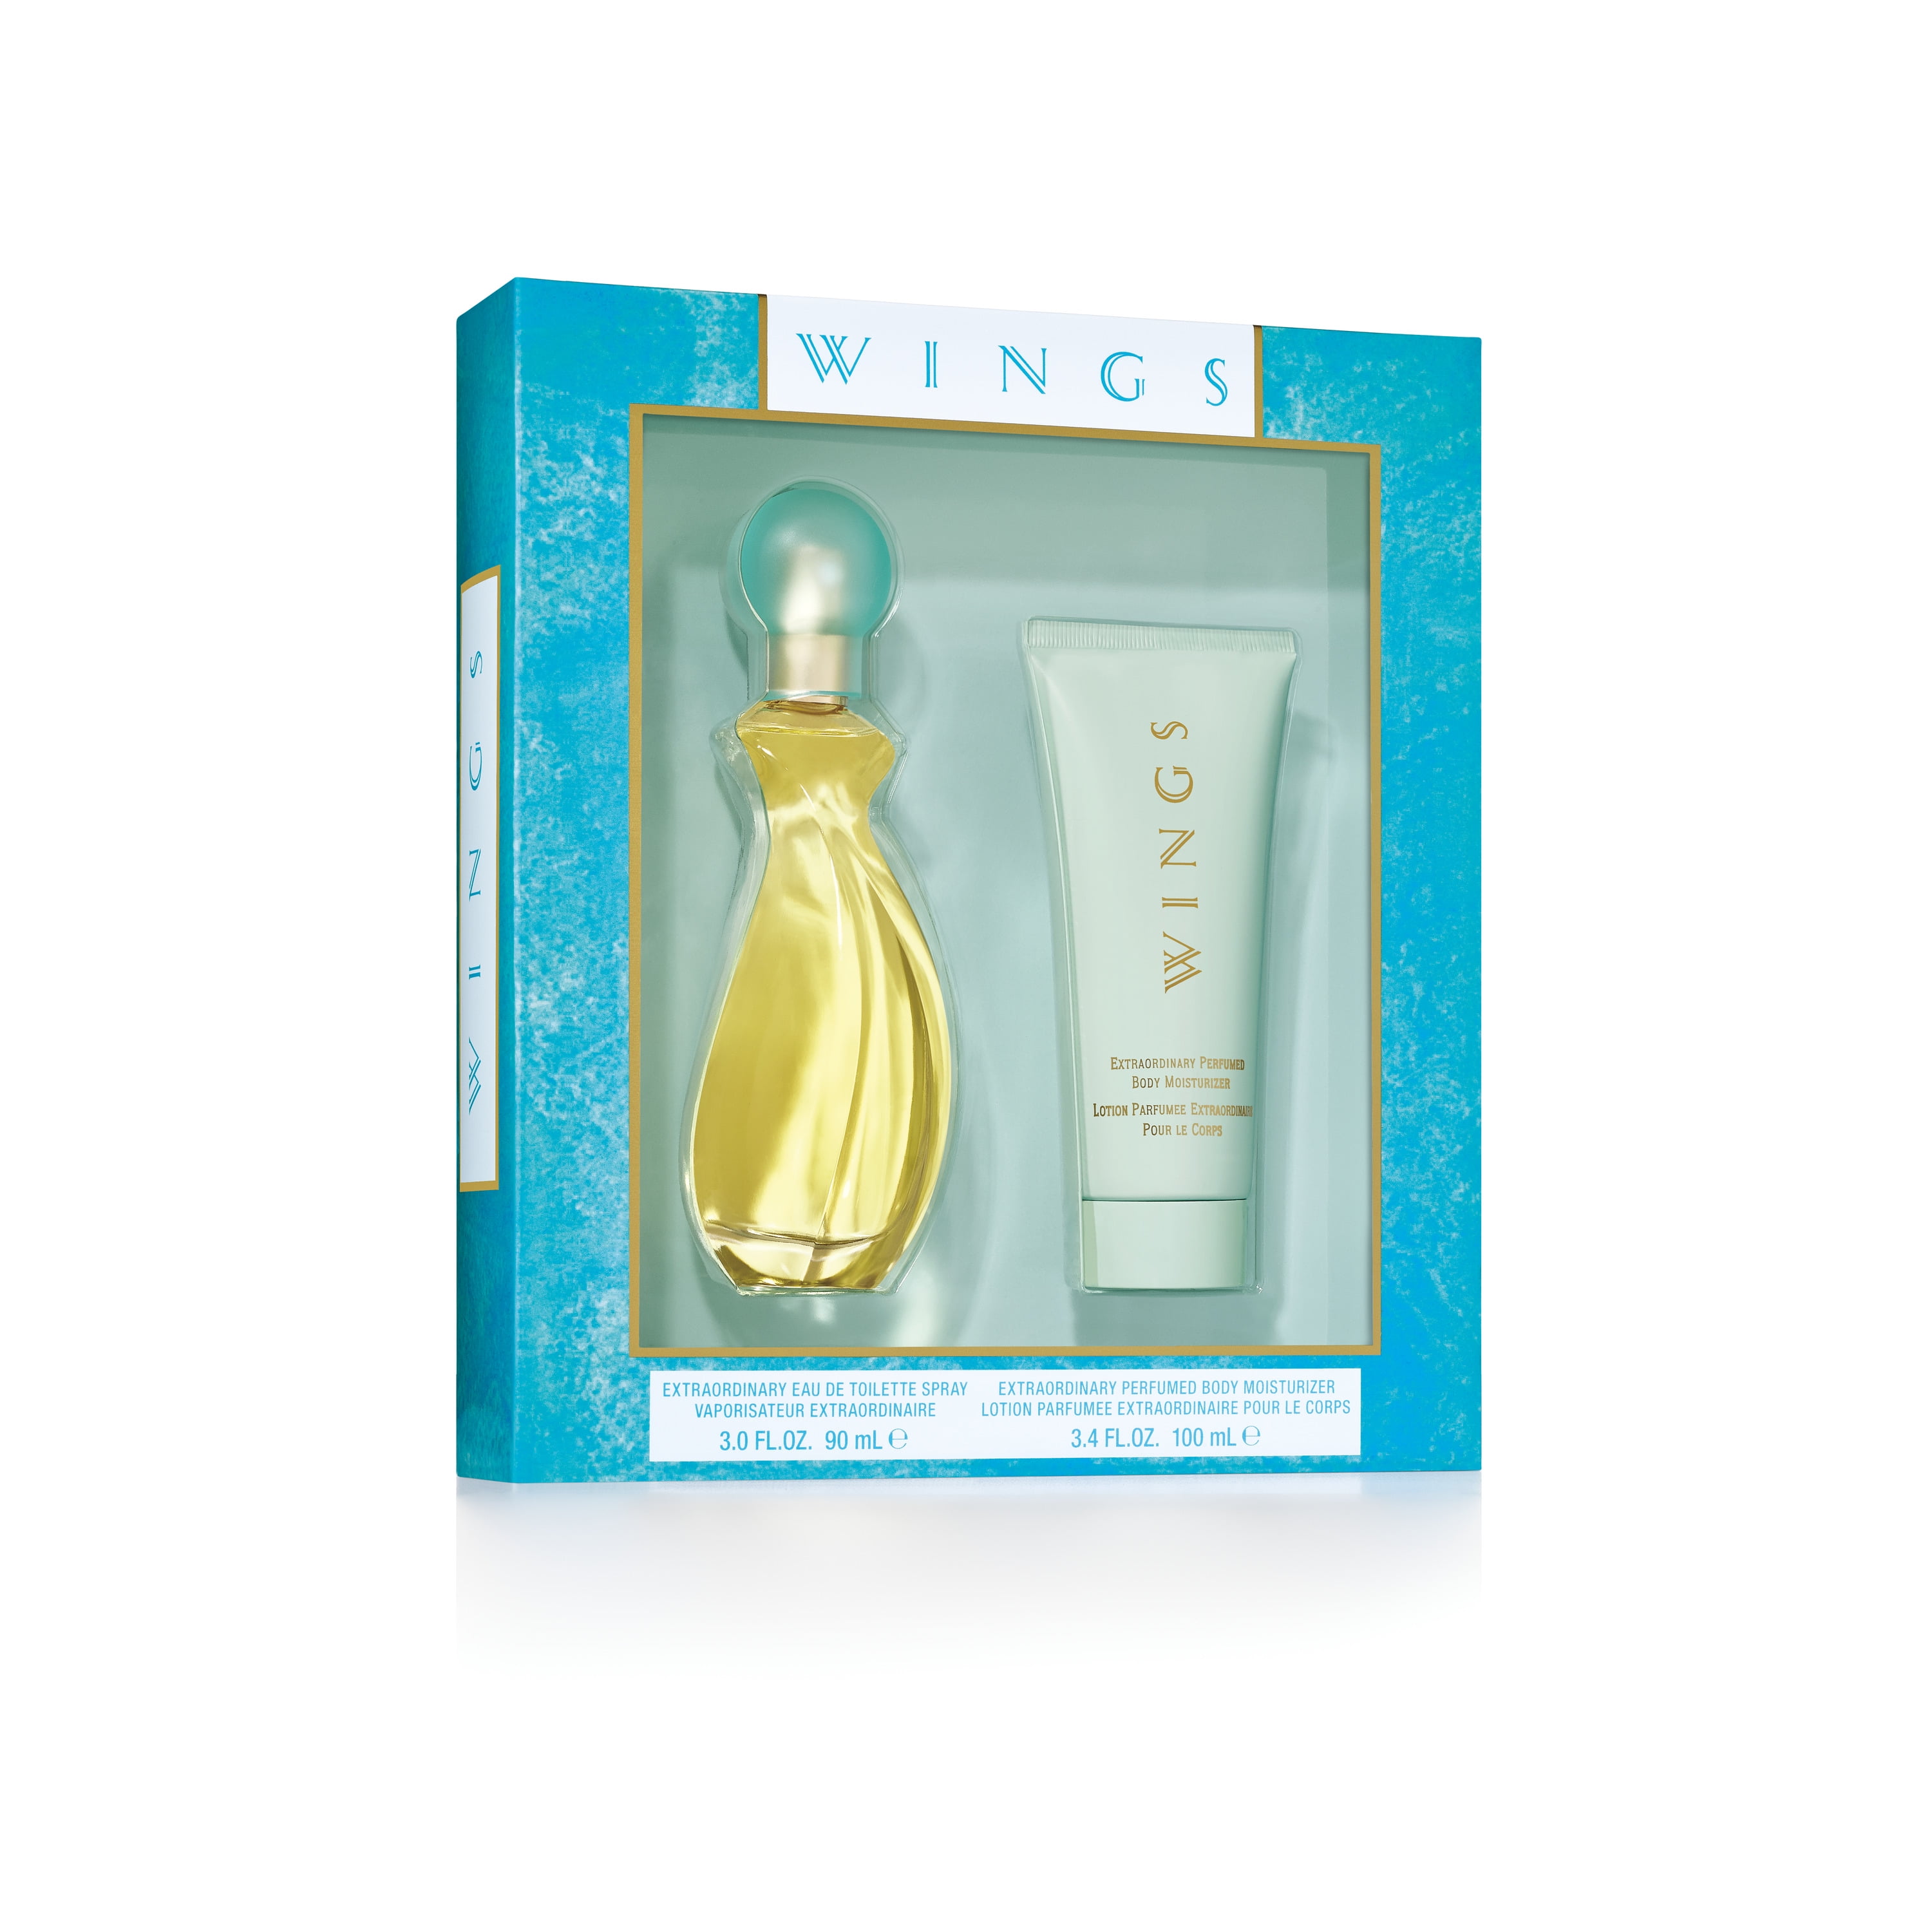 wings cologne gift set